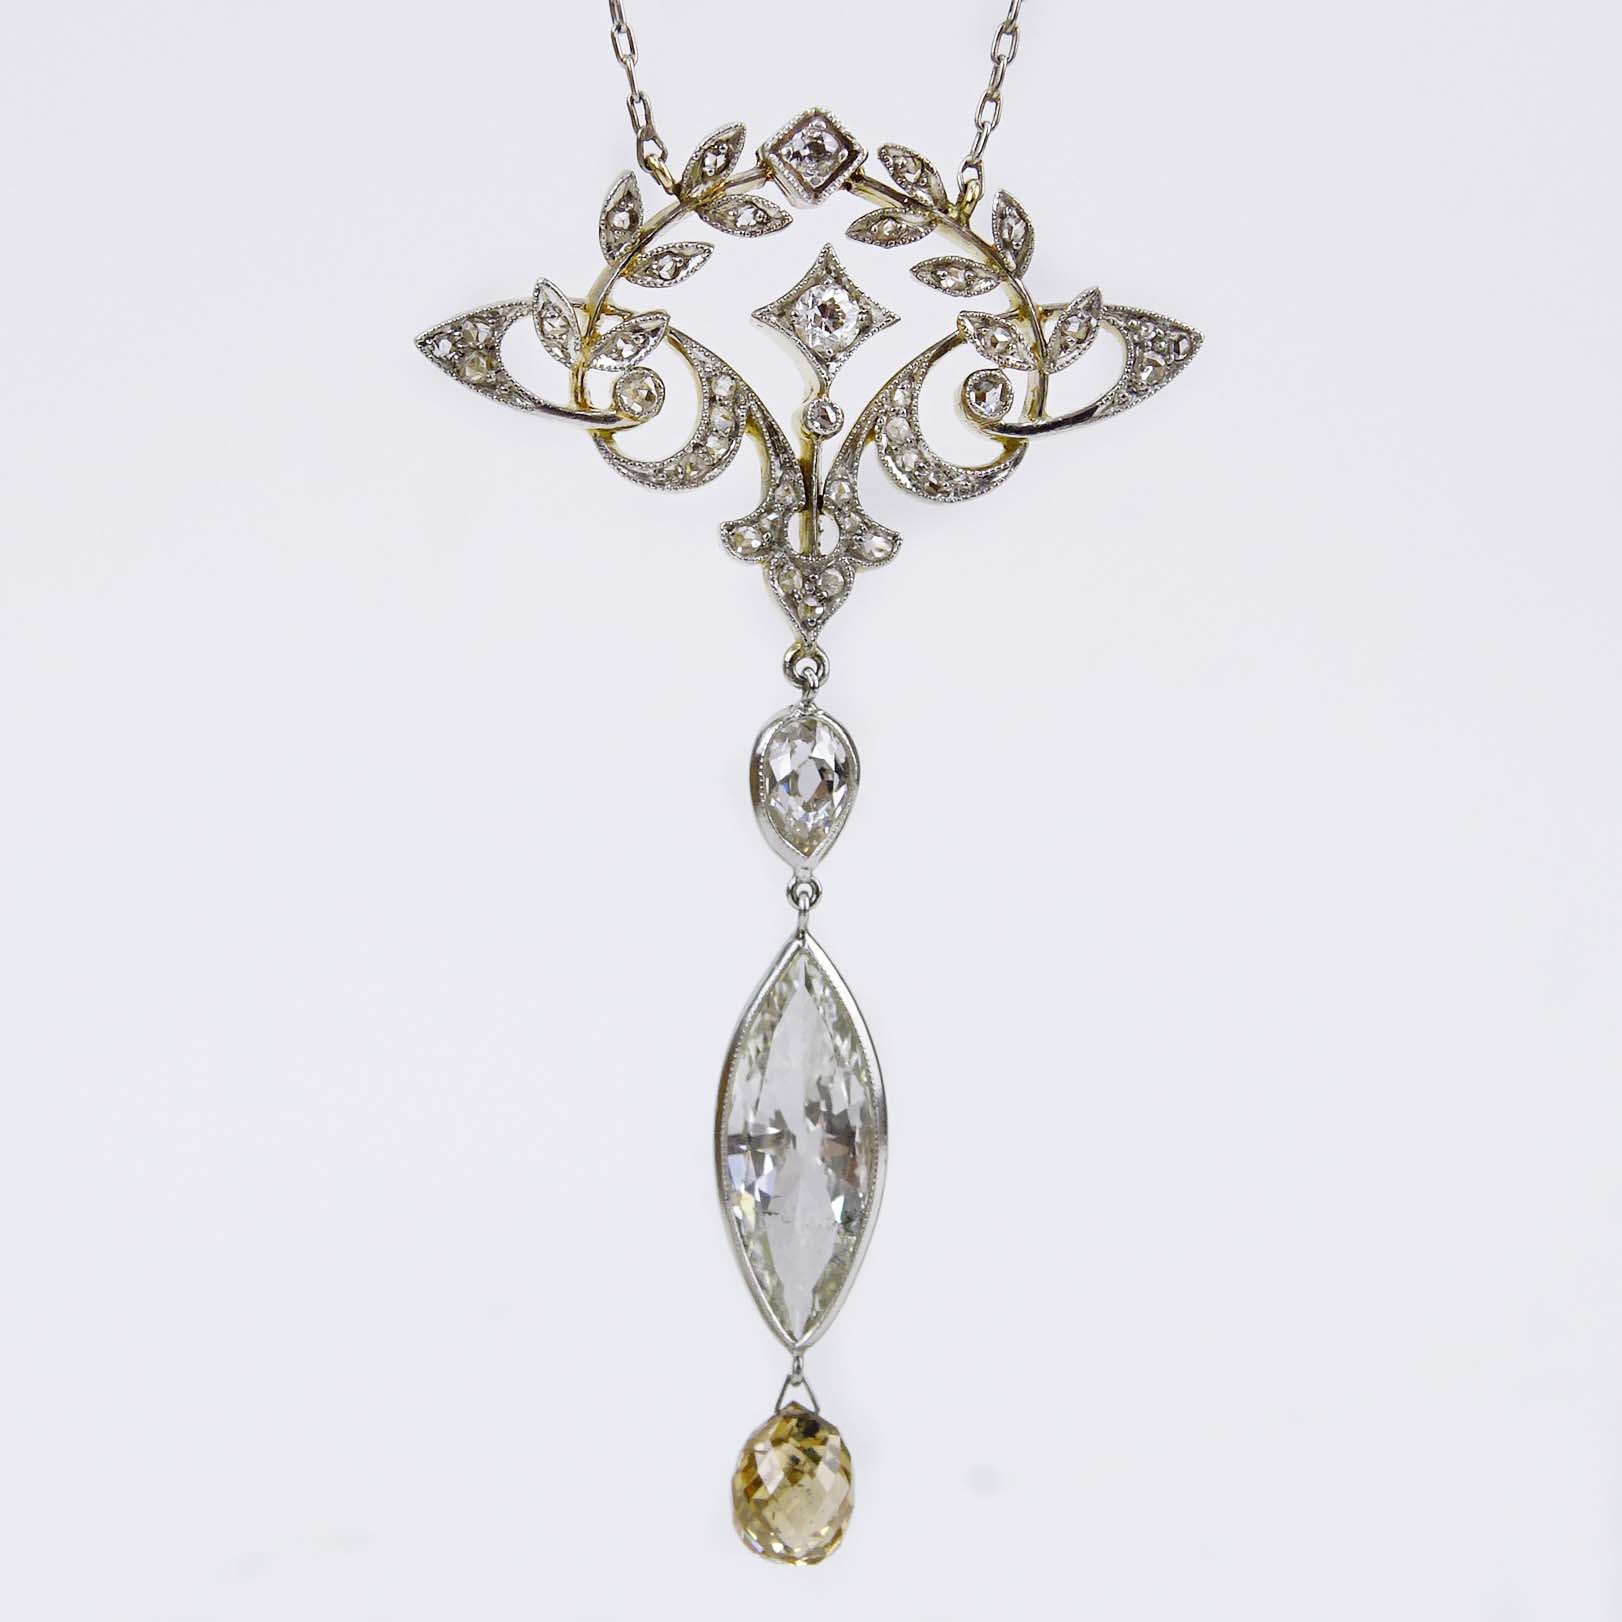 Antique Platinum and 18 Karat Yellow Gold Pendant Necklace Set with an Approx. 2.40 Carat Marquise Cut Diamond, 1.50 Carat Fancy Yellowish Brown Briolette Cut Diamond and further accented with 2.25 Carat Diamonds. 